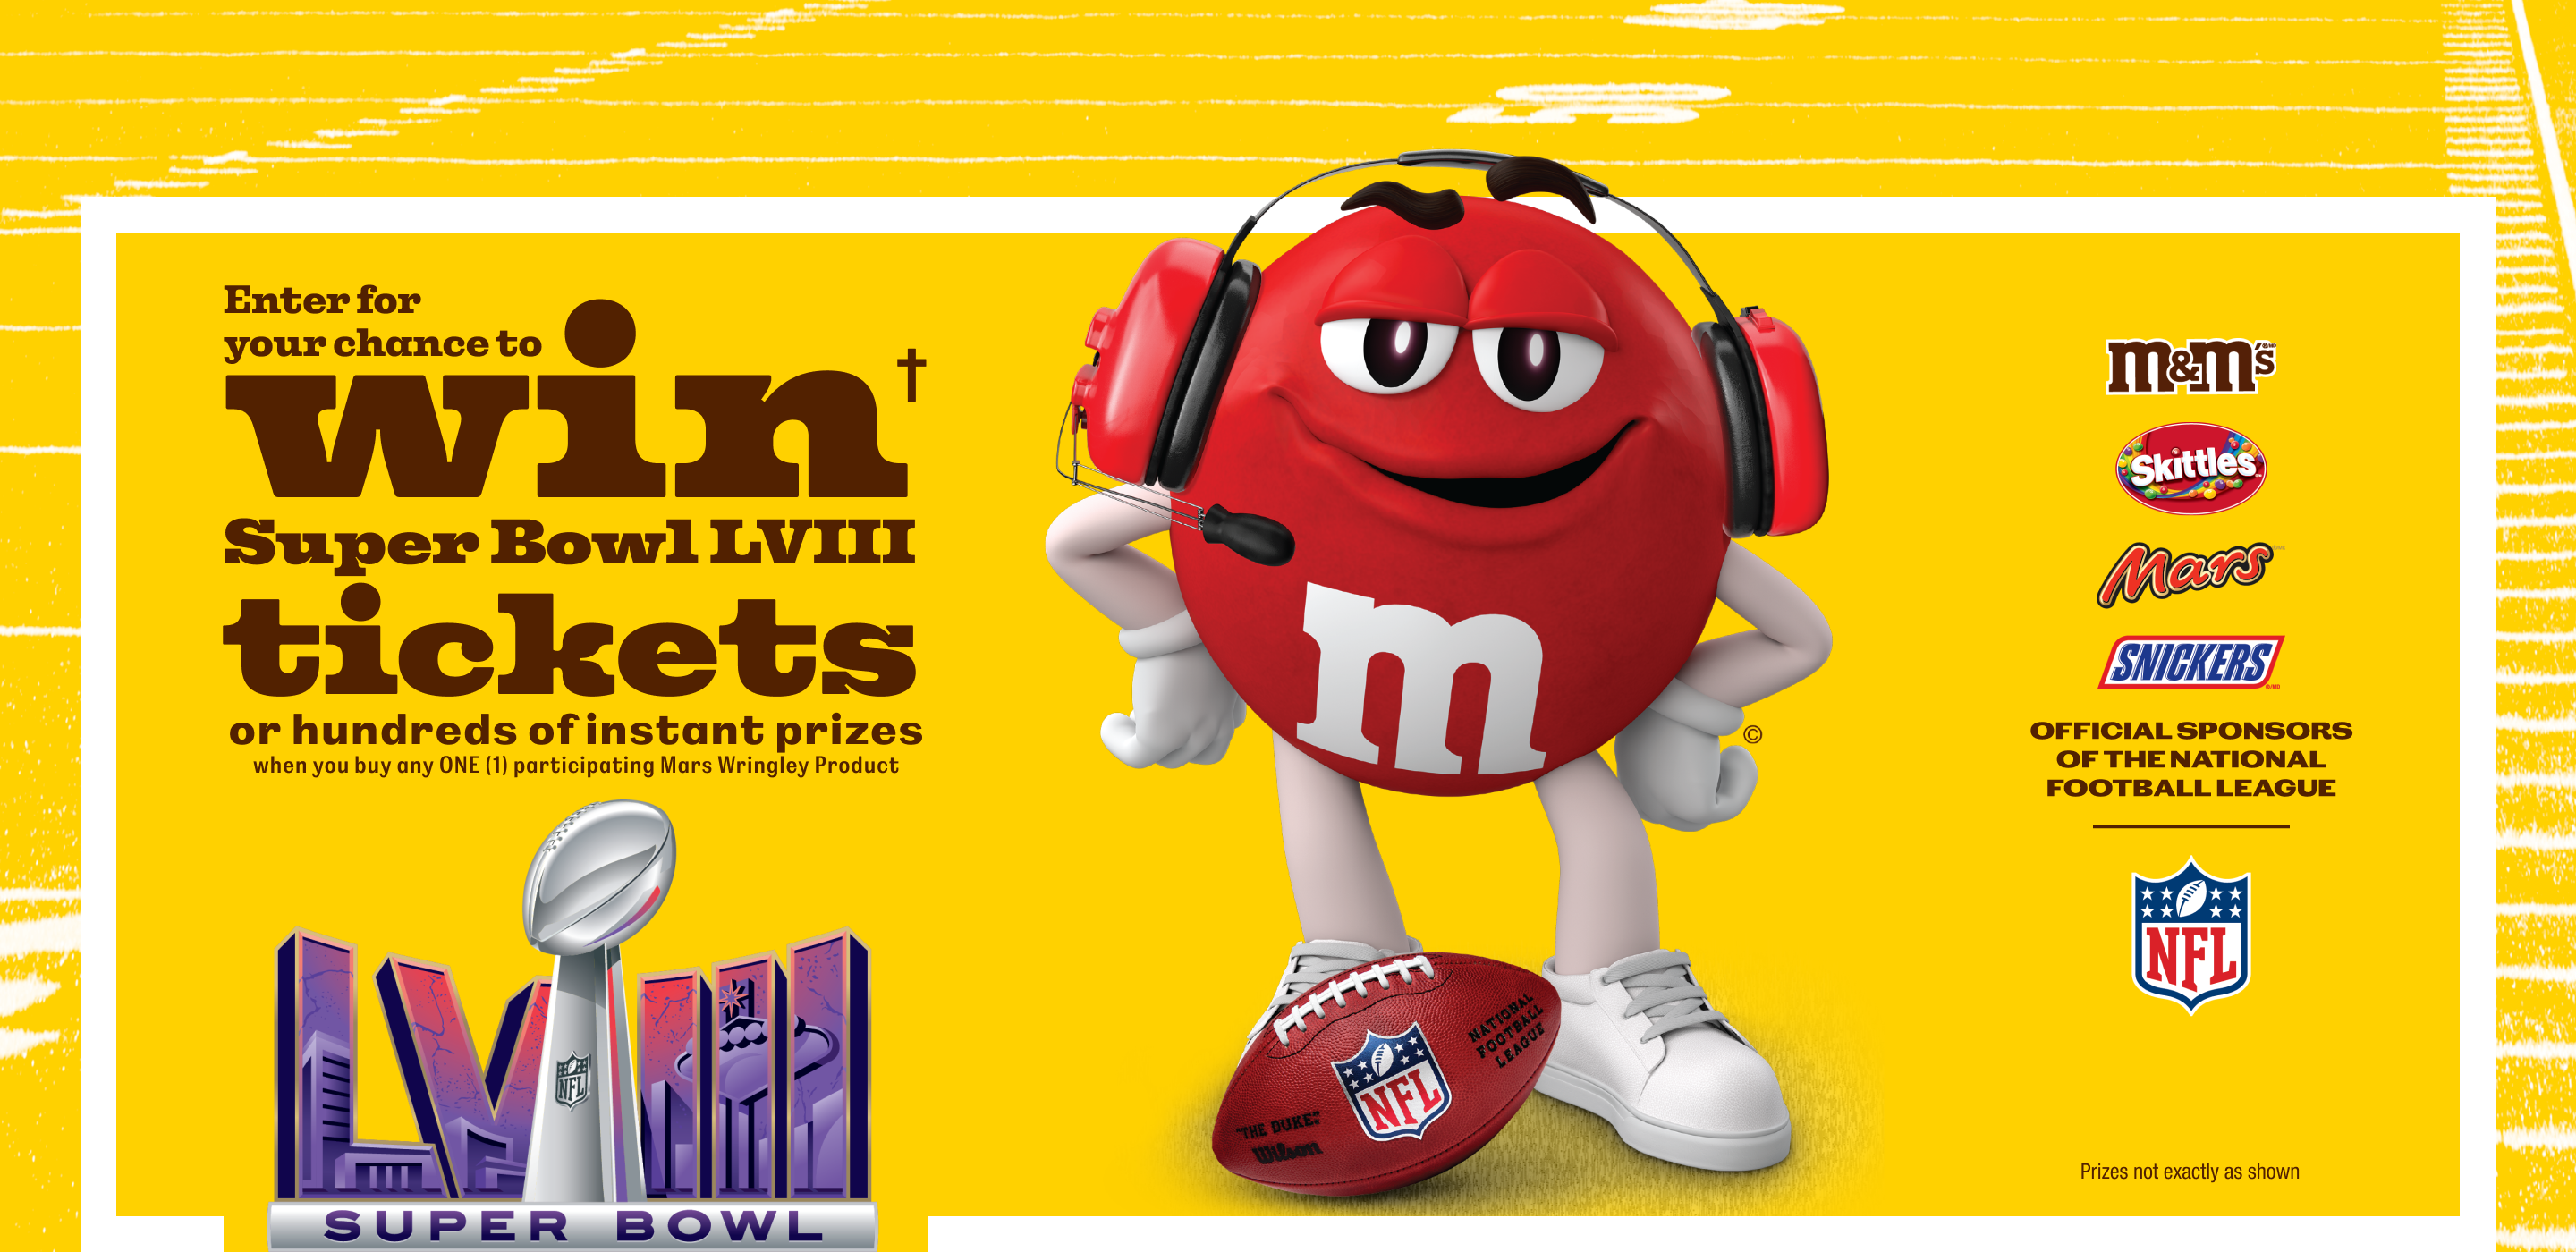 You Could Win a Trip to Super Bowl LVIII Plus 1 of 350 Instant Prizes